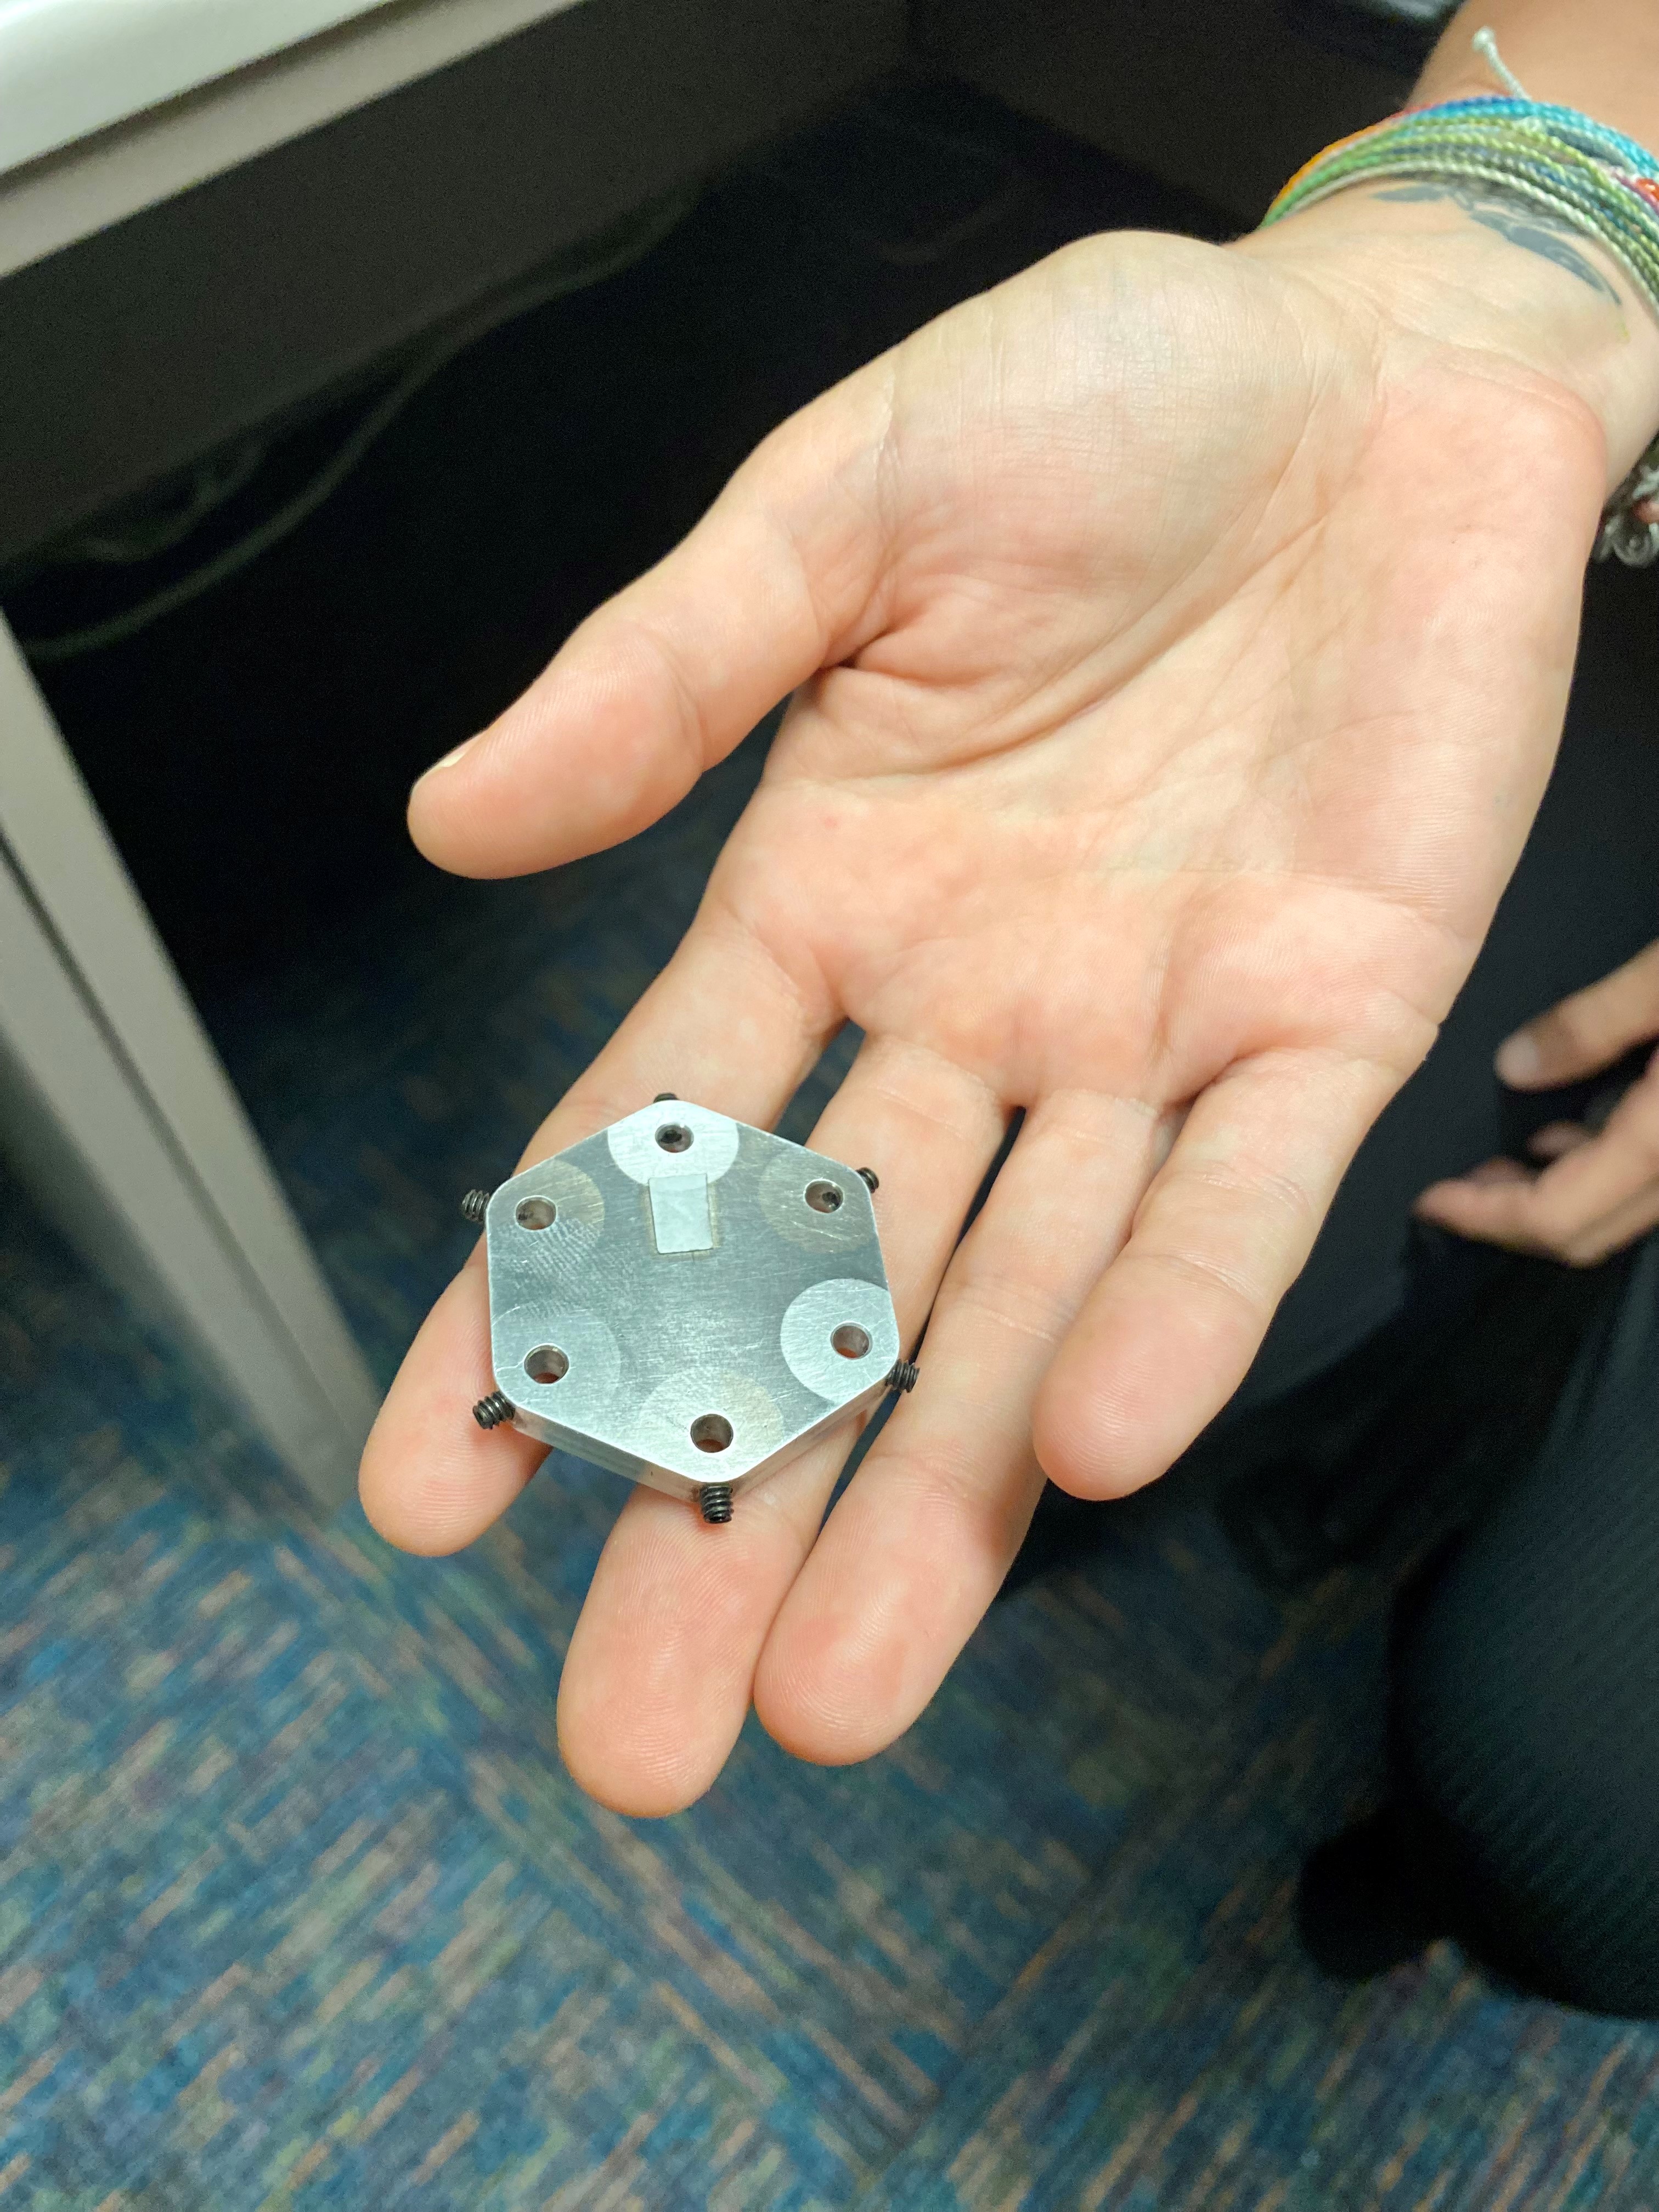 Wallace holds the six-sample holder in her outstretched hand. It is a hexagonal, flat, metal apparatus with six bored holes for storing samples.